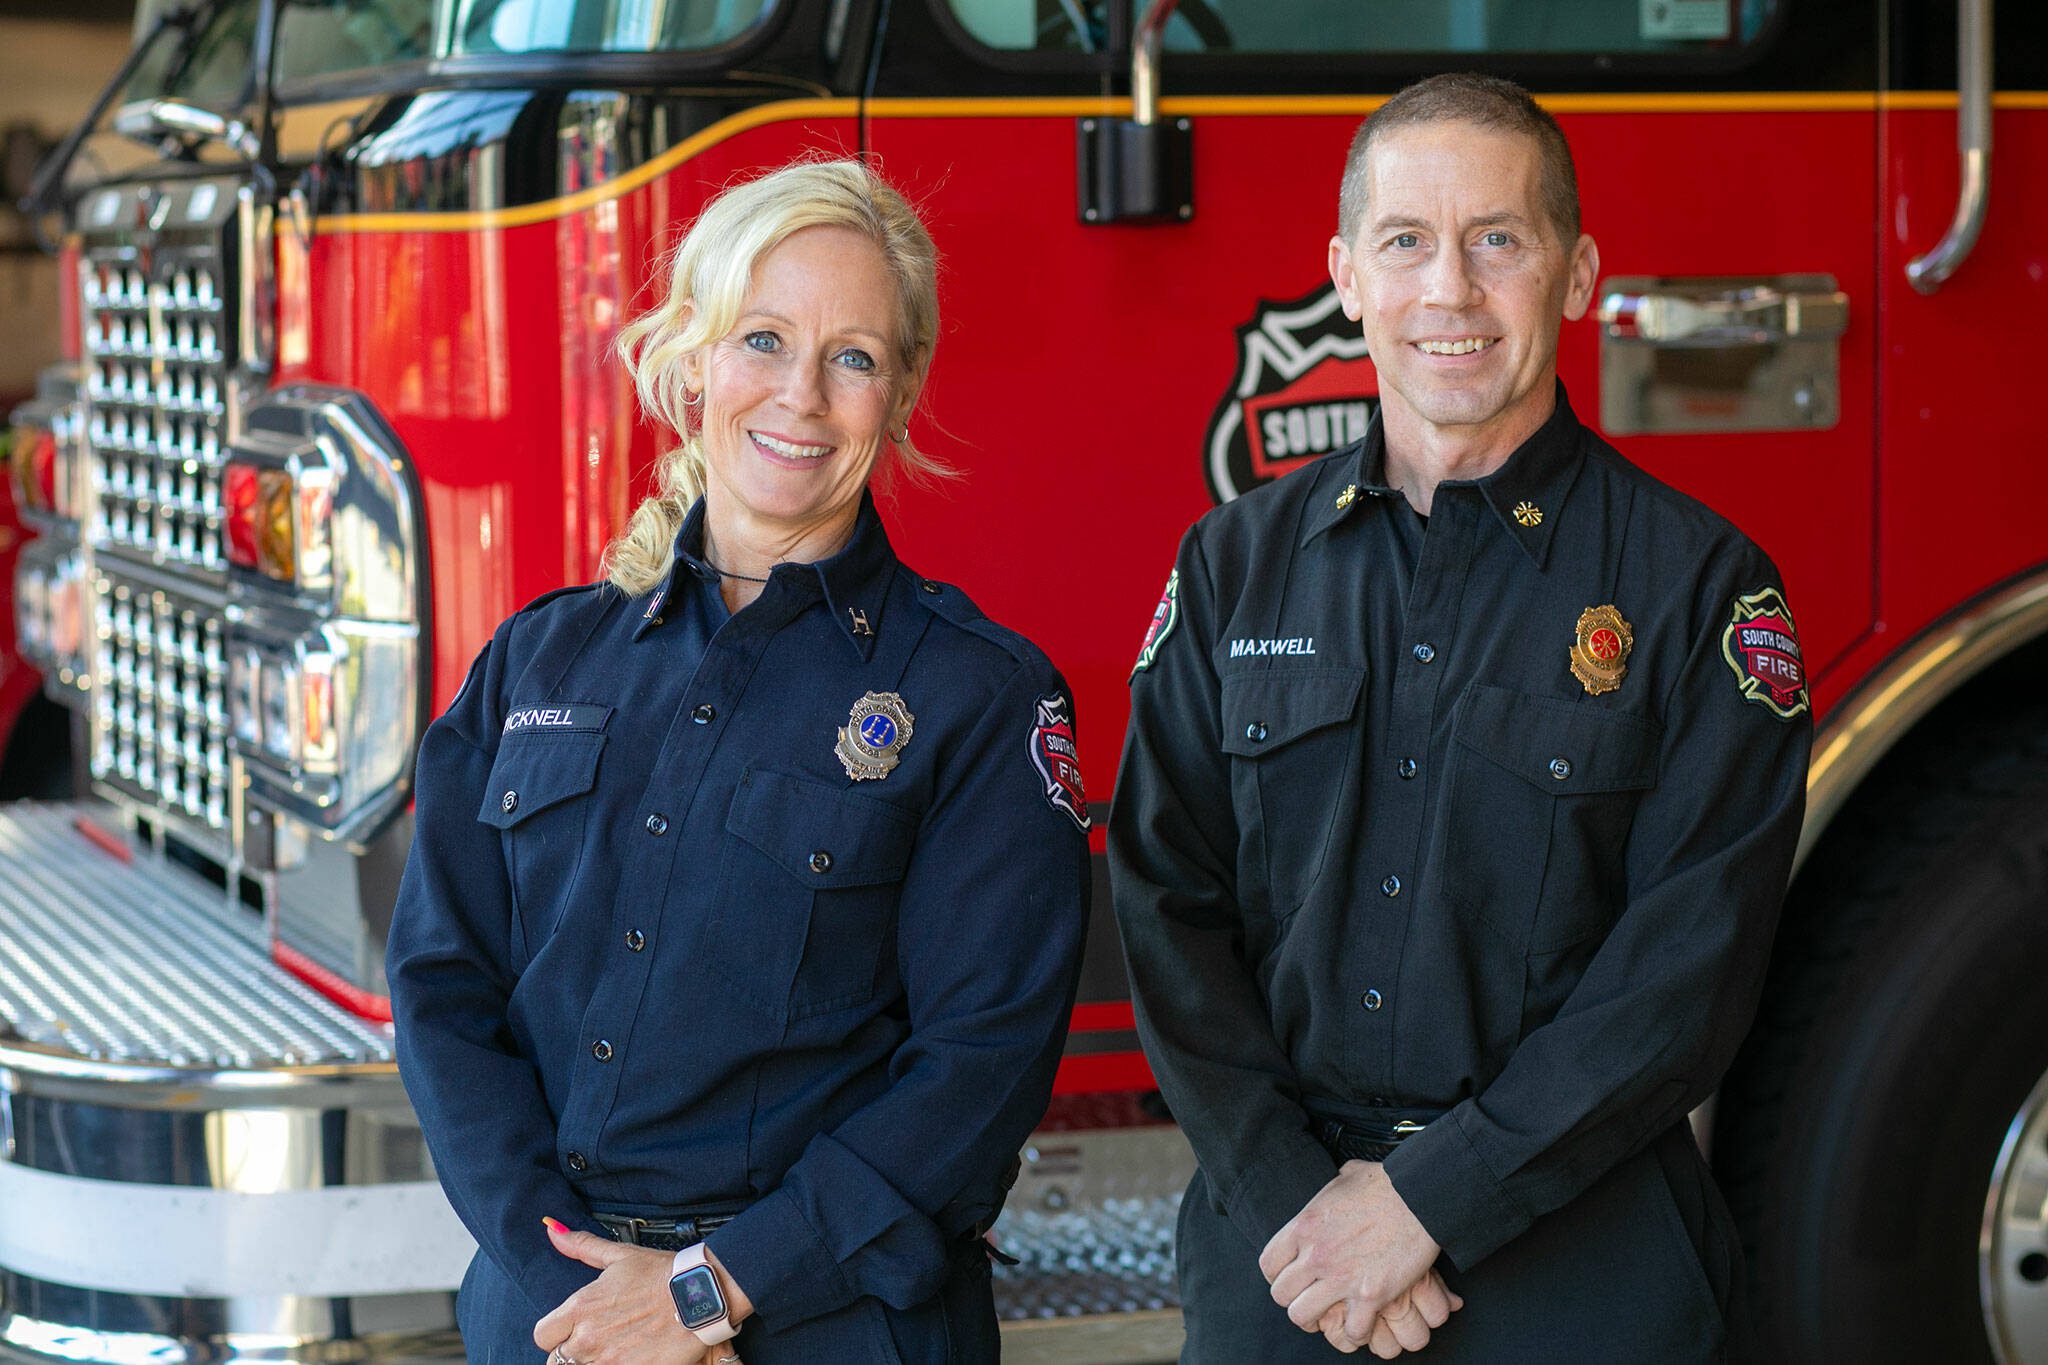 Captain Community Resource Paramedic Nicole Picknell, left, and South County Fire Assistant Chief Shaughn Maxwell stand together at Fire Station 15 on Wednesday, Nov. 8, 2023, in Lynnwood, Washington. (Ryan Berry / The Herald)